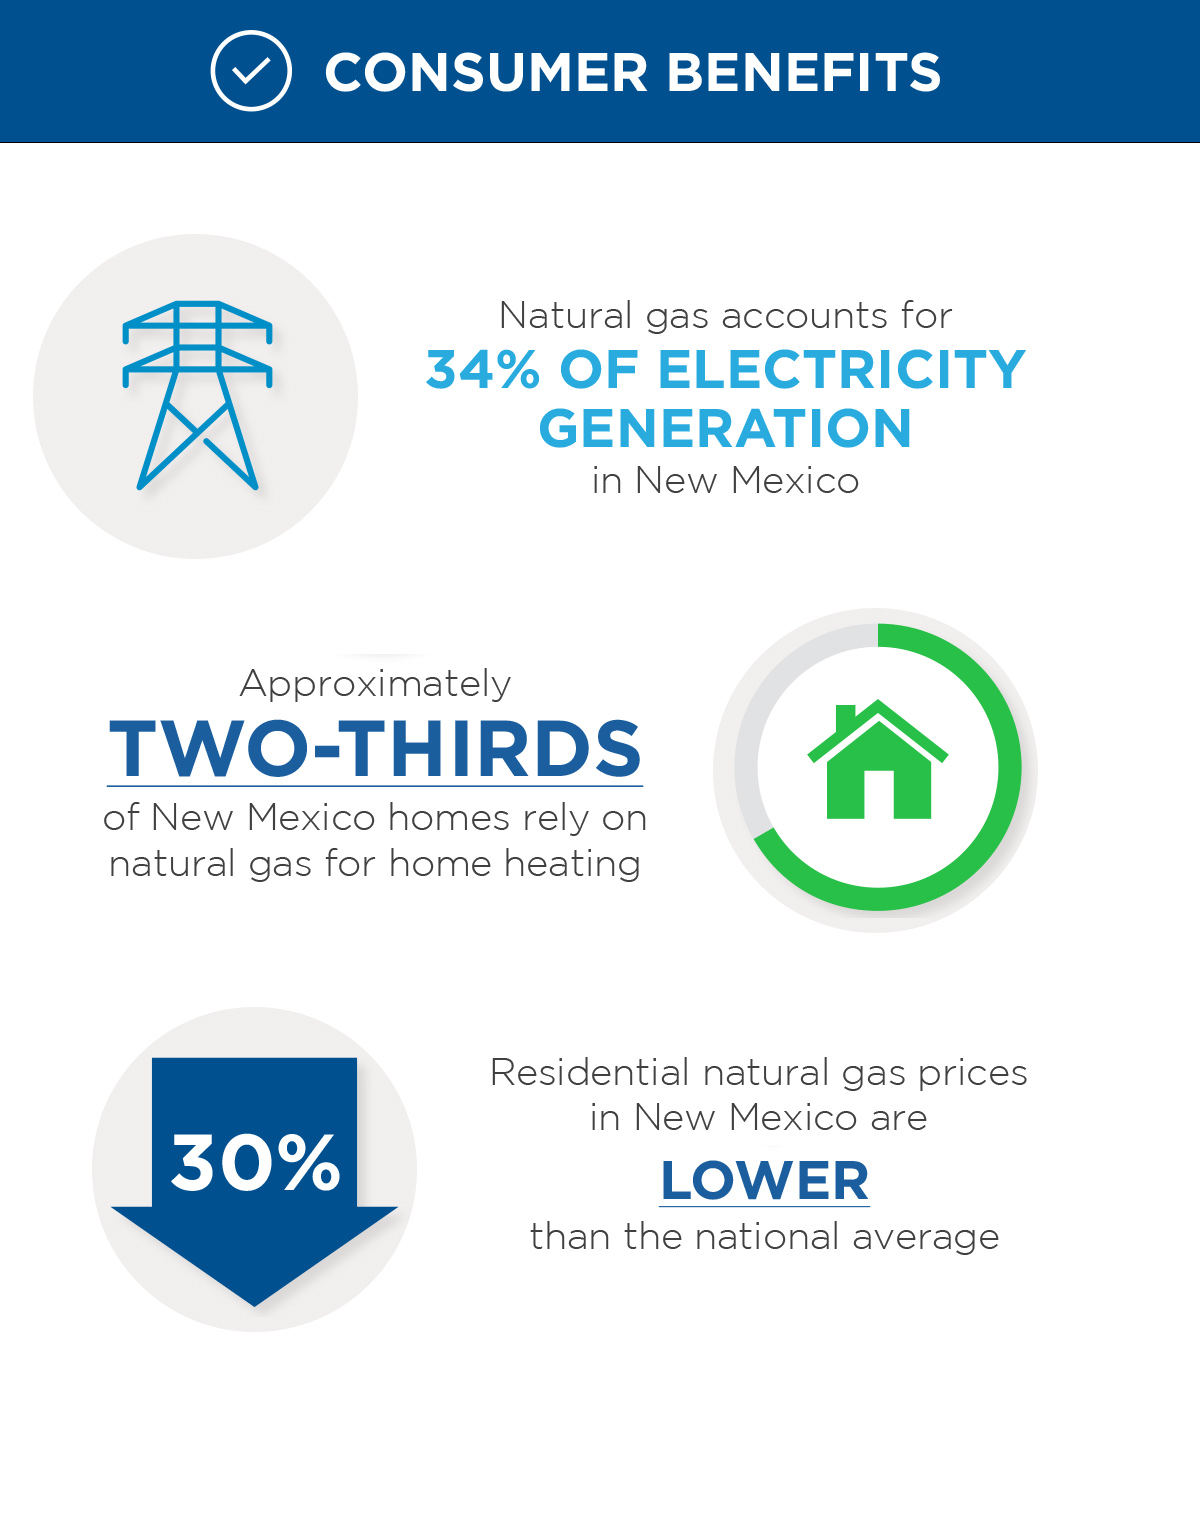 The benefits of natural gas for New Mexico